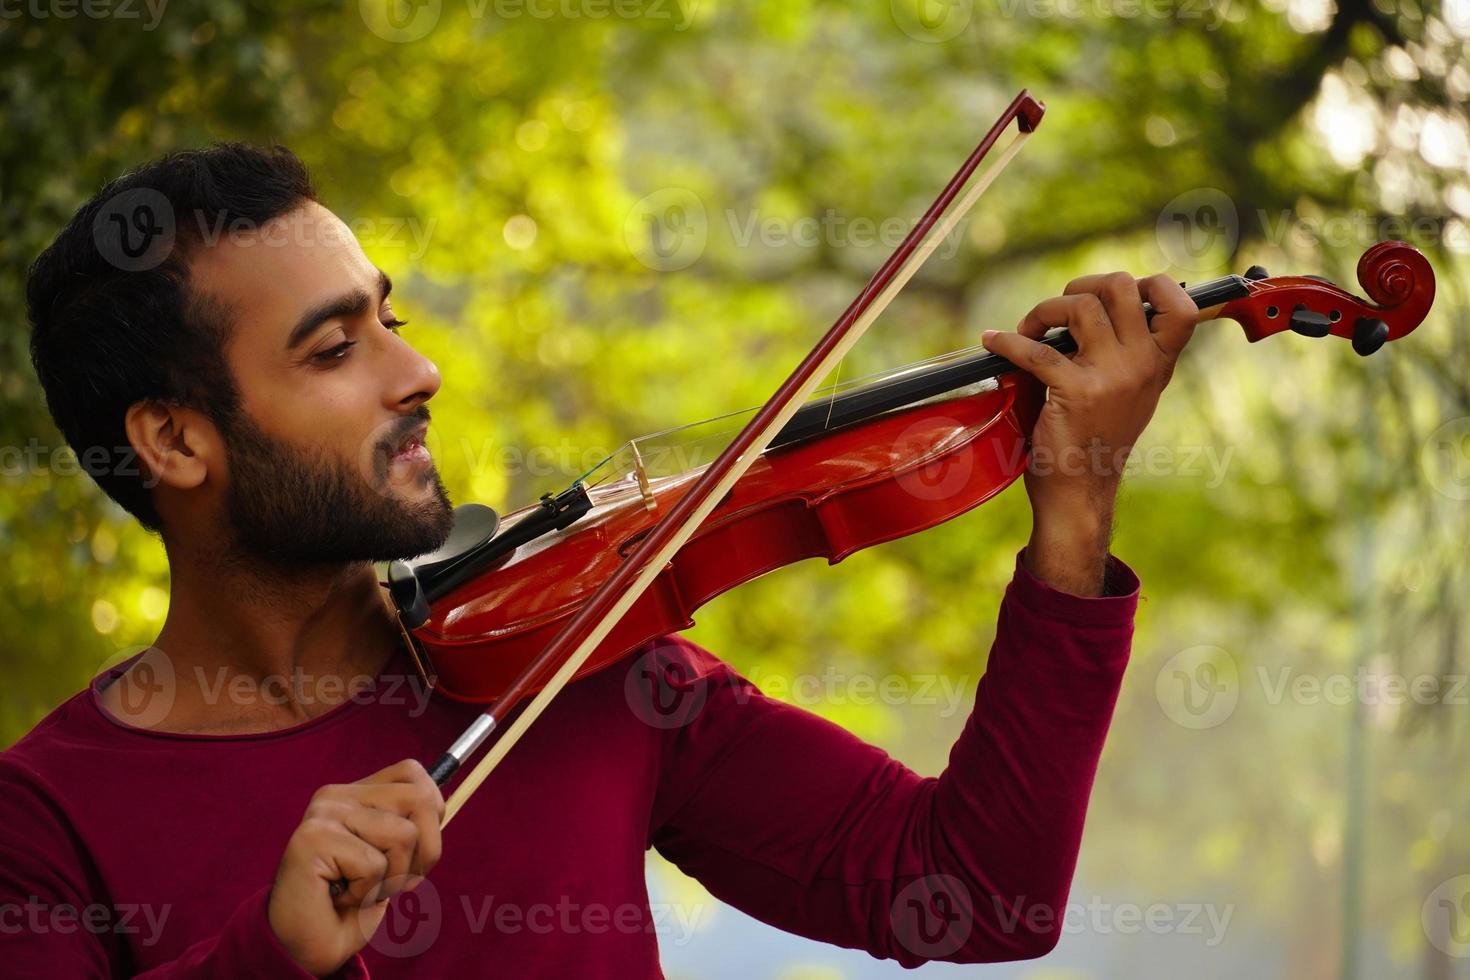 violin player images Music and musical tone concept. images of man musician photo